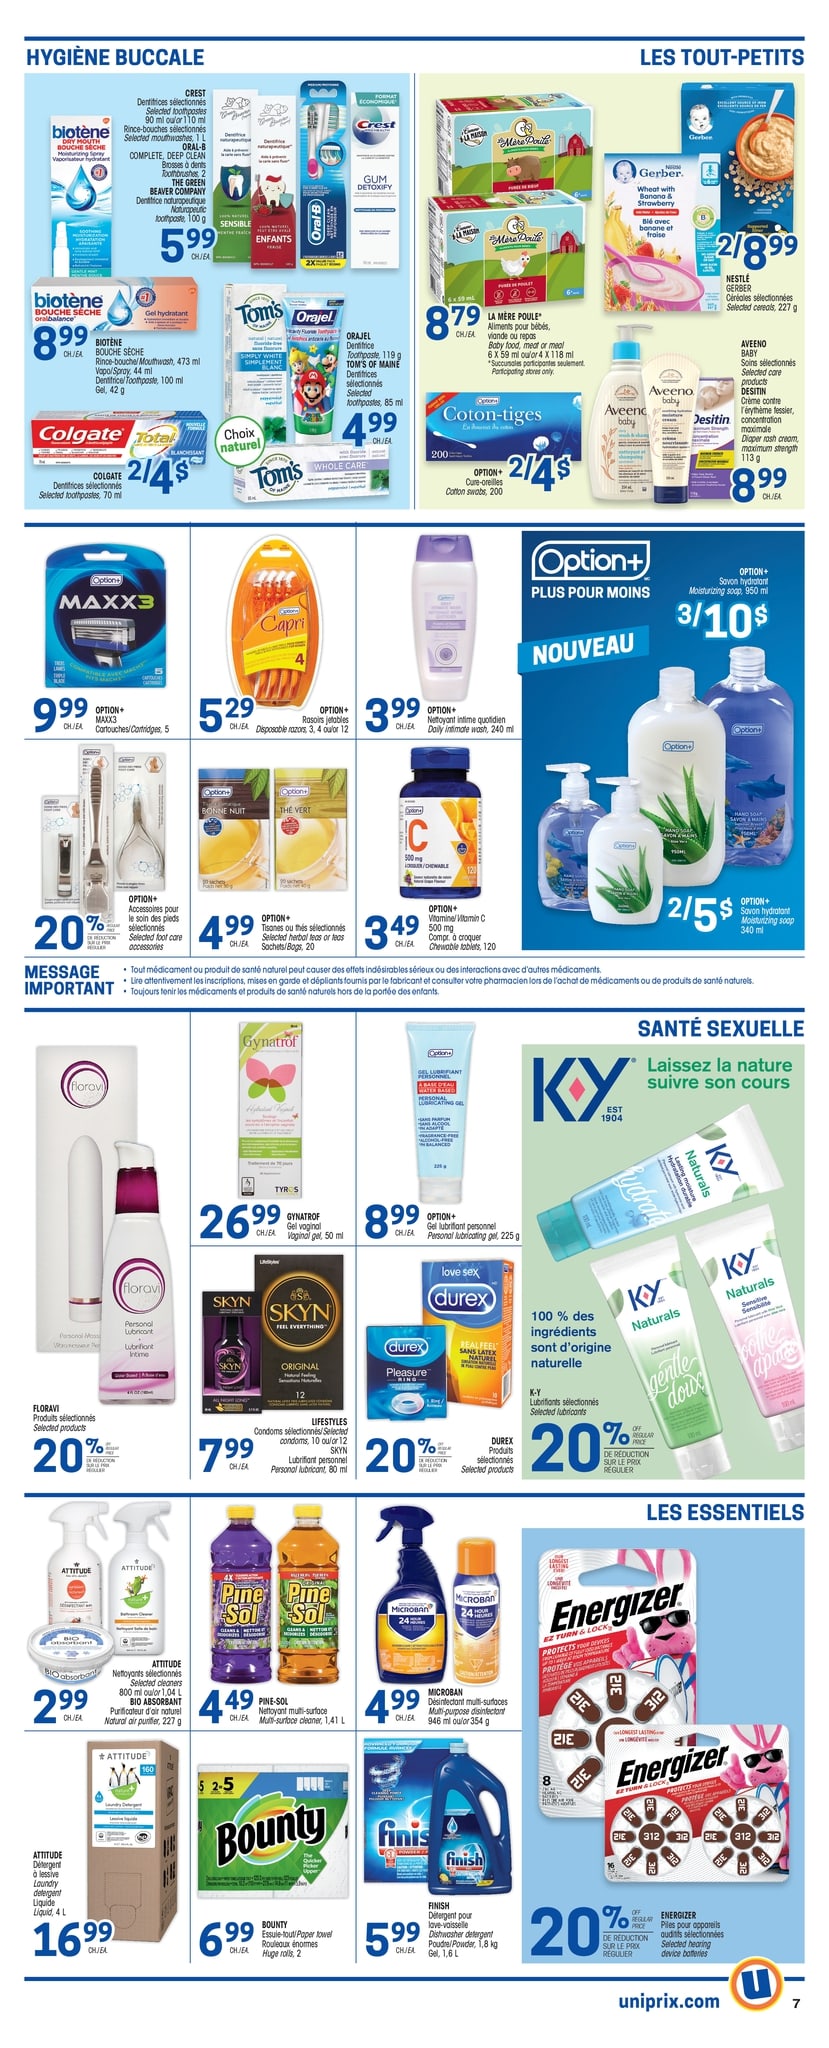 Uniprix - Weekly Flyer Specials - Page 13